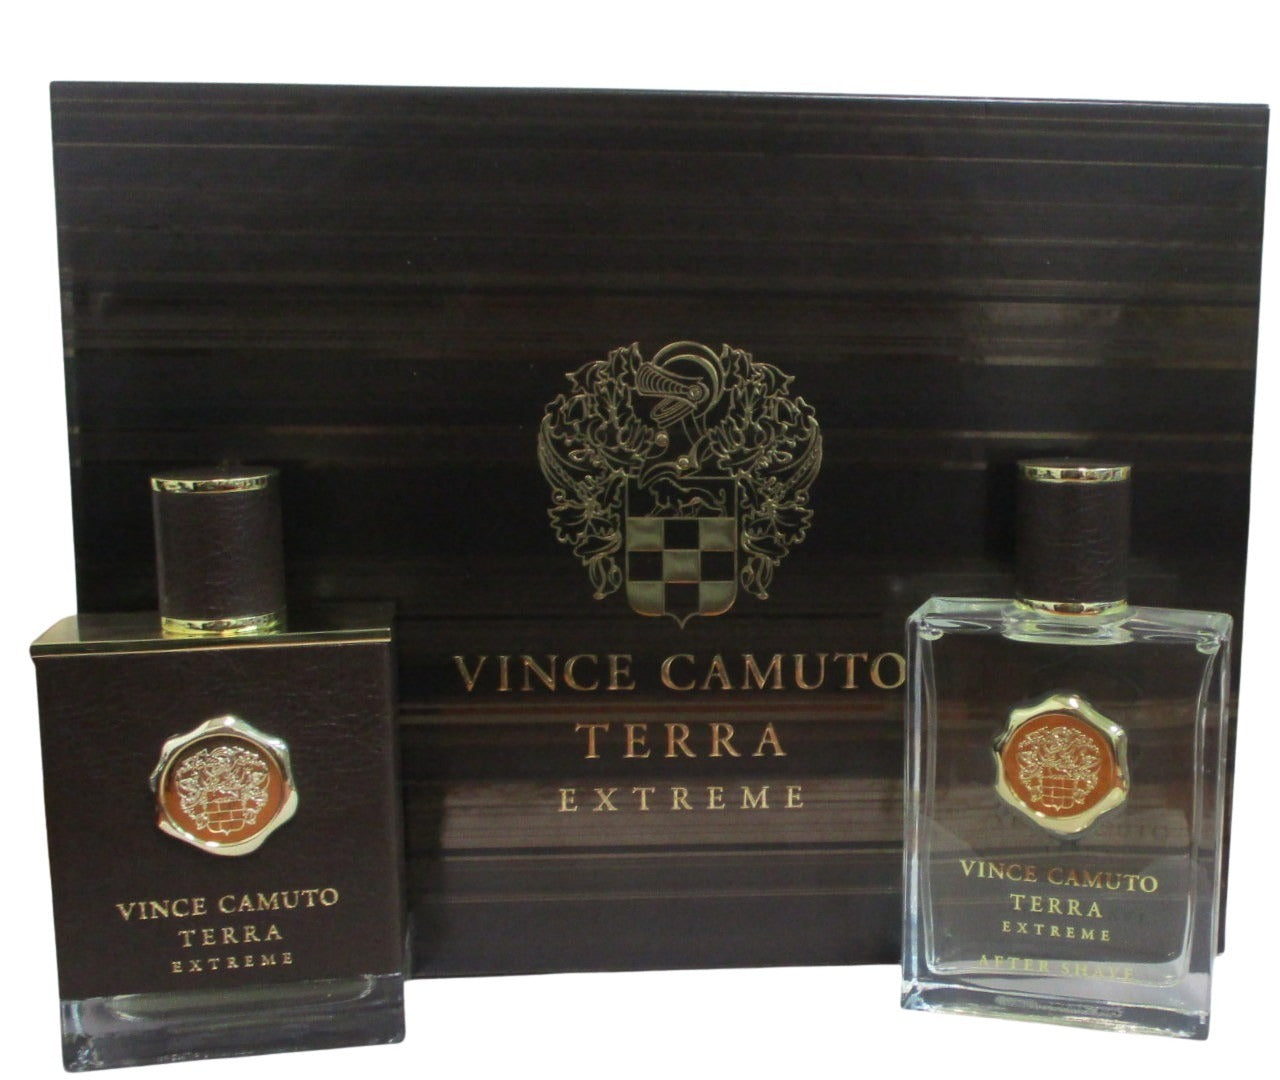 Vince Camuto Terra Extreme 2 Piece Gift Set